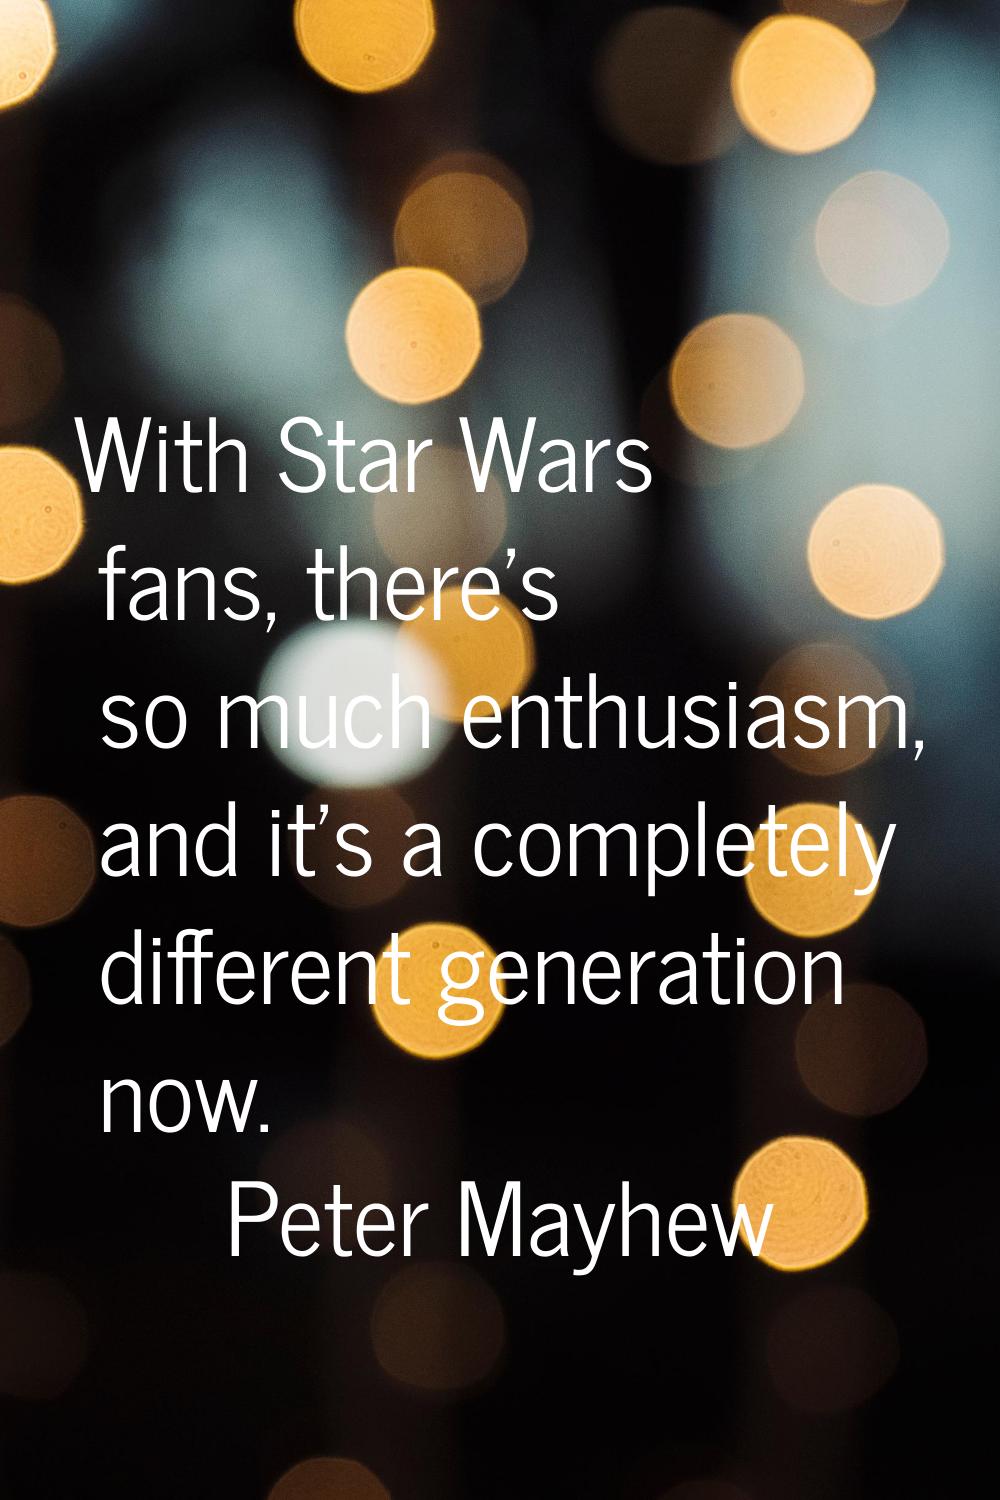 With Star Wars fans, there's so much enthusiasm, and it's a completely different generation now.